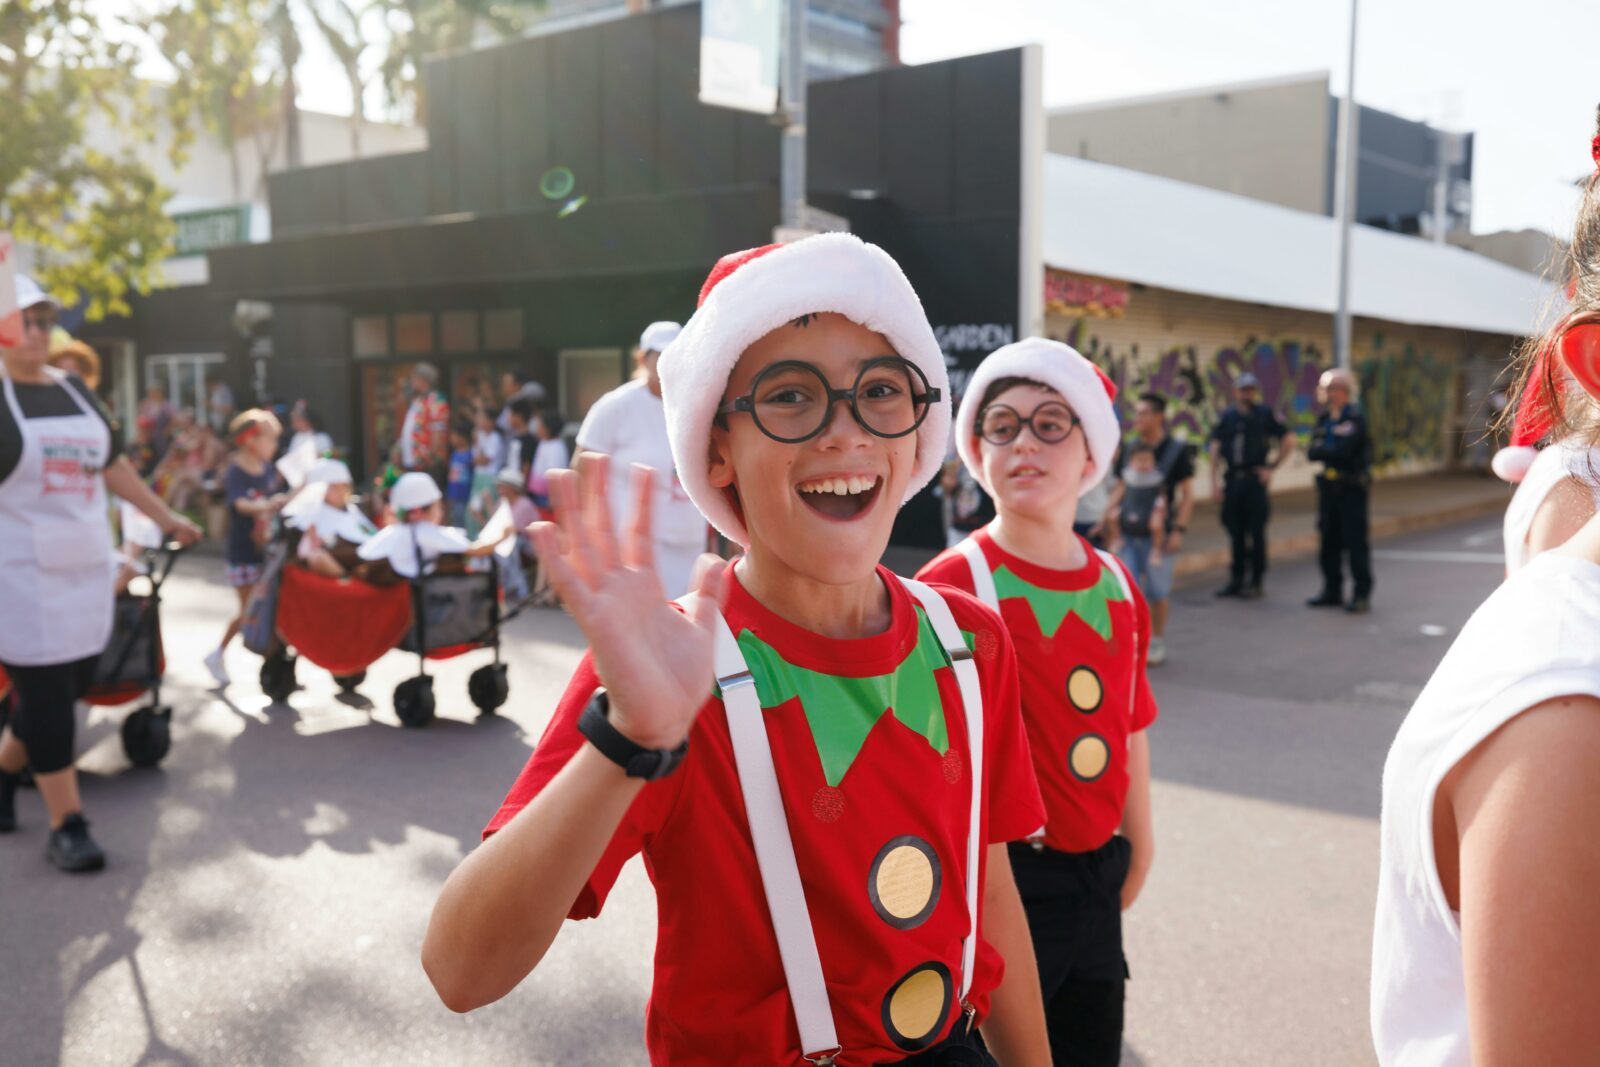 Two children dressed as elves happily wave at the camera, spreading holiday cheer.